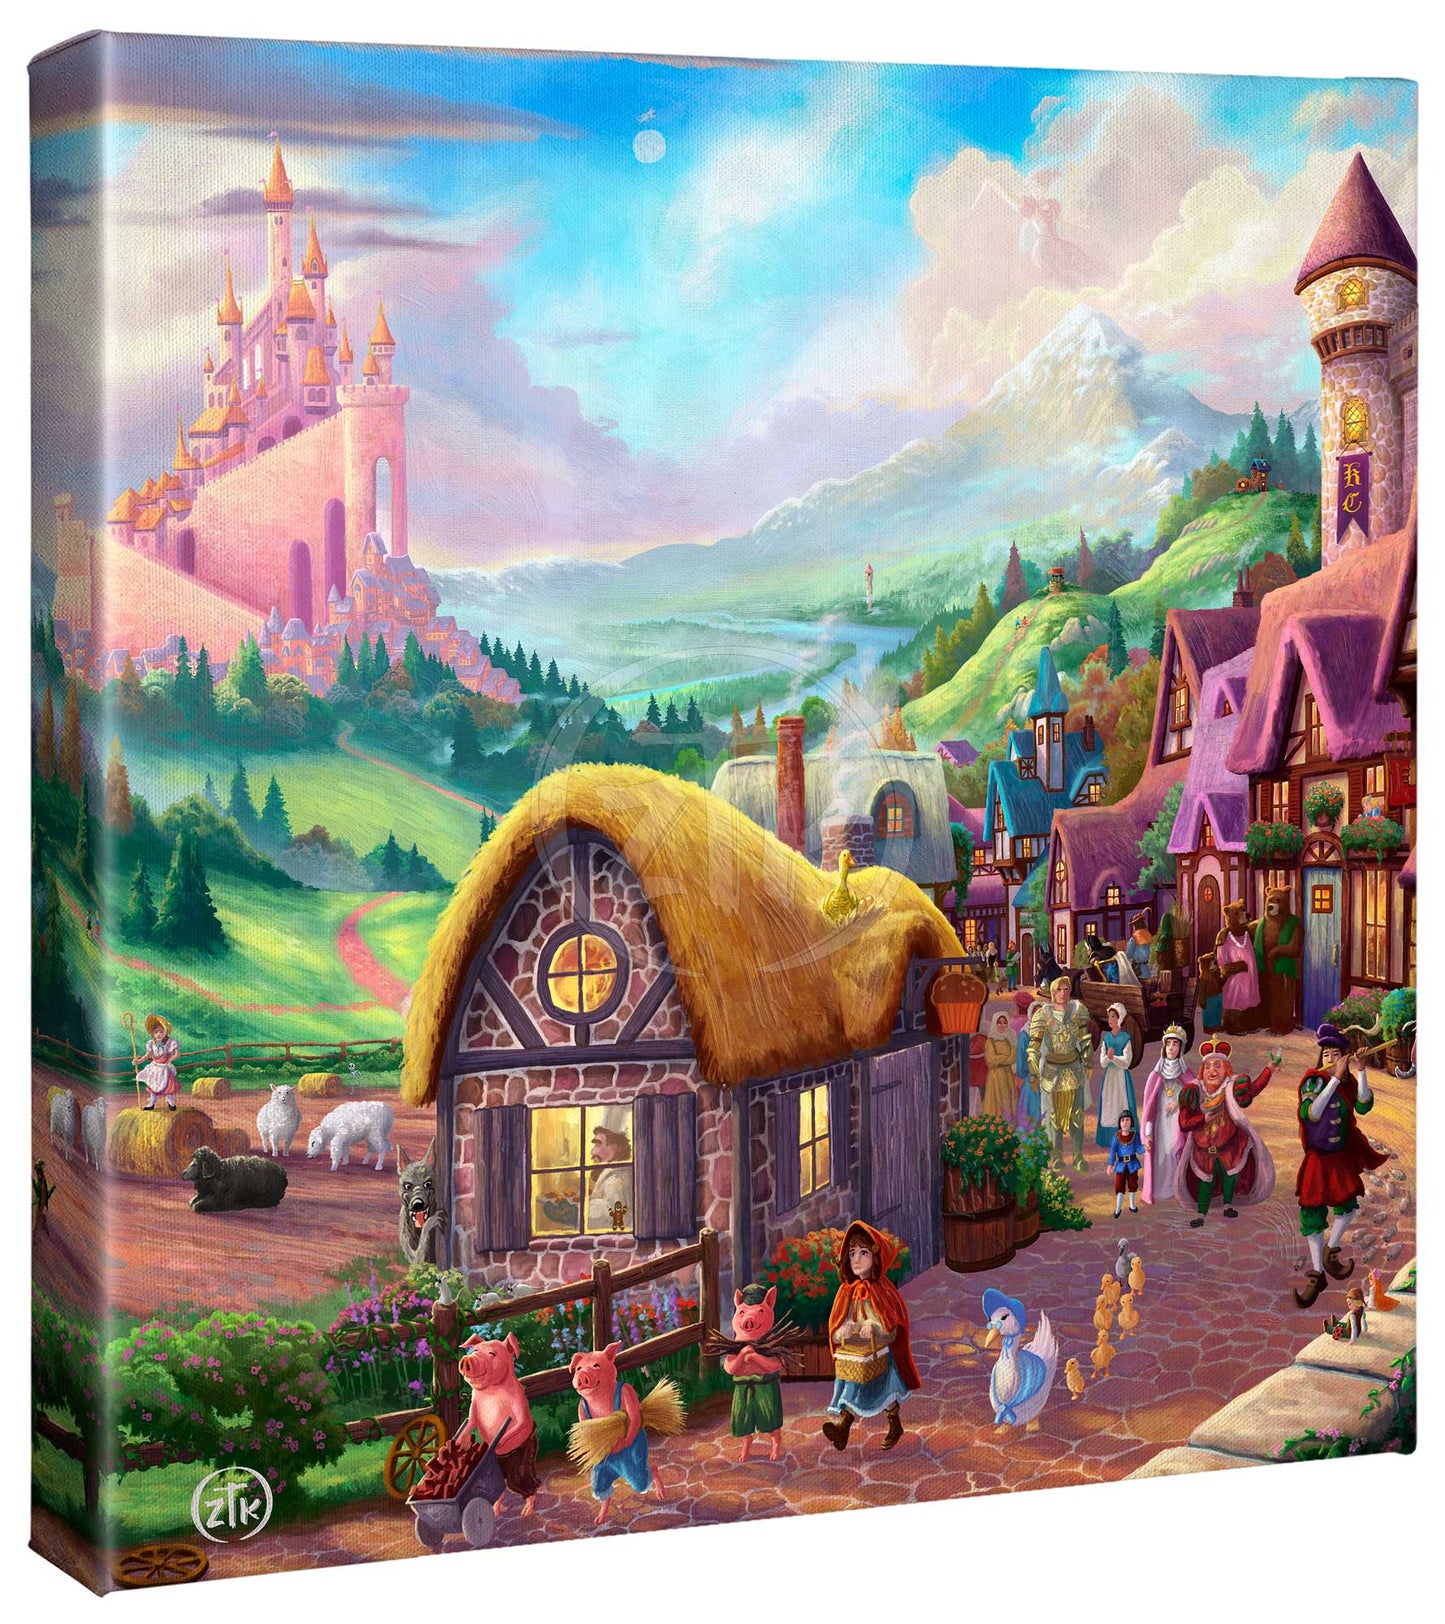 Storybook Land - 14" x 14" Gallery Wrapped Canvas